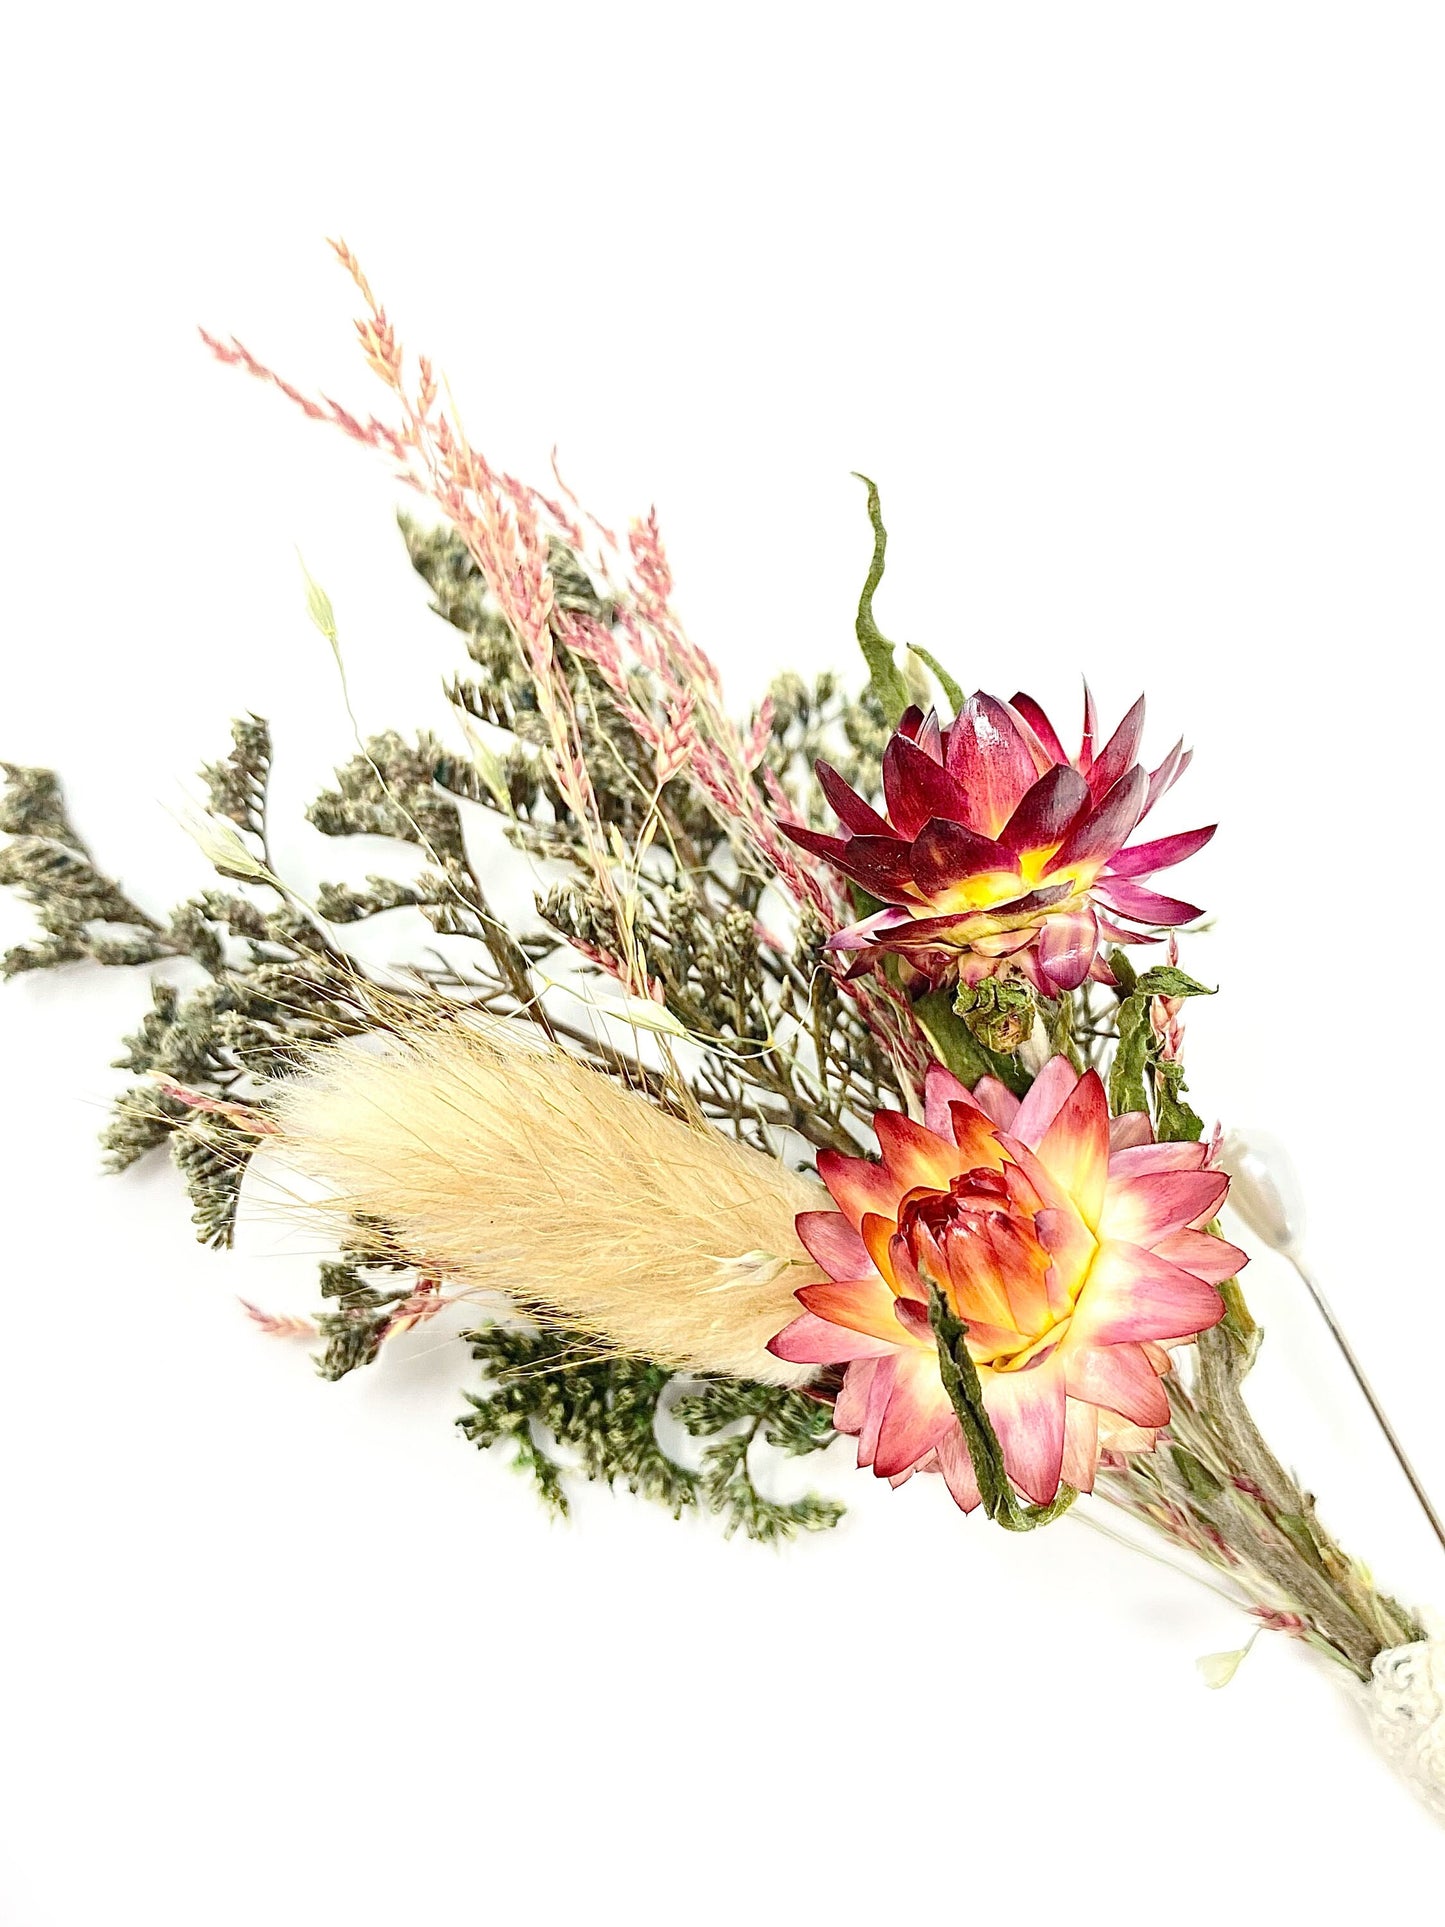 Wedding Boutonniere, Preserved Floral, Dried Flowers, Bridal Accessories, Decor, Strawflowers, Bunny Tails